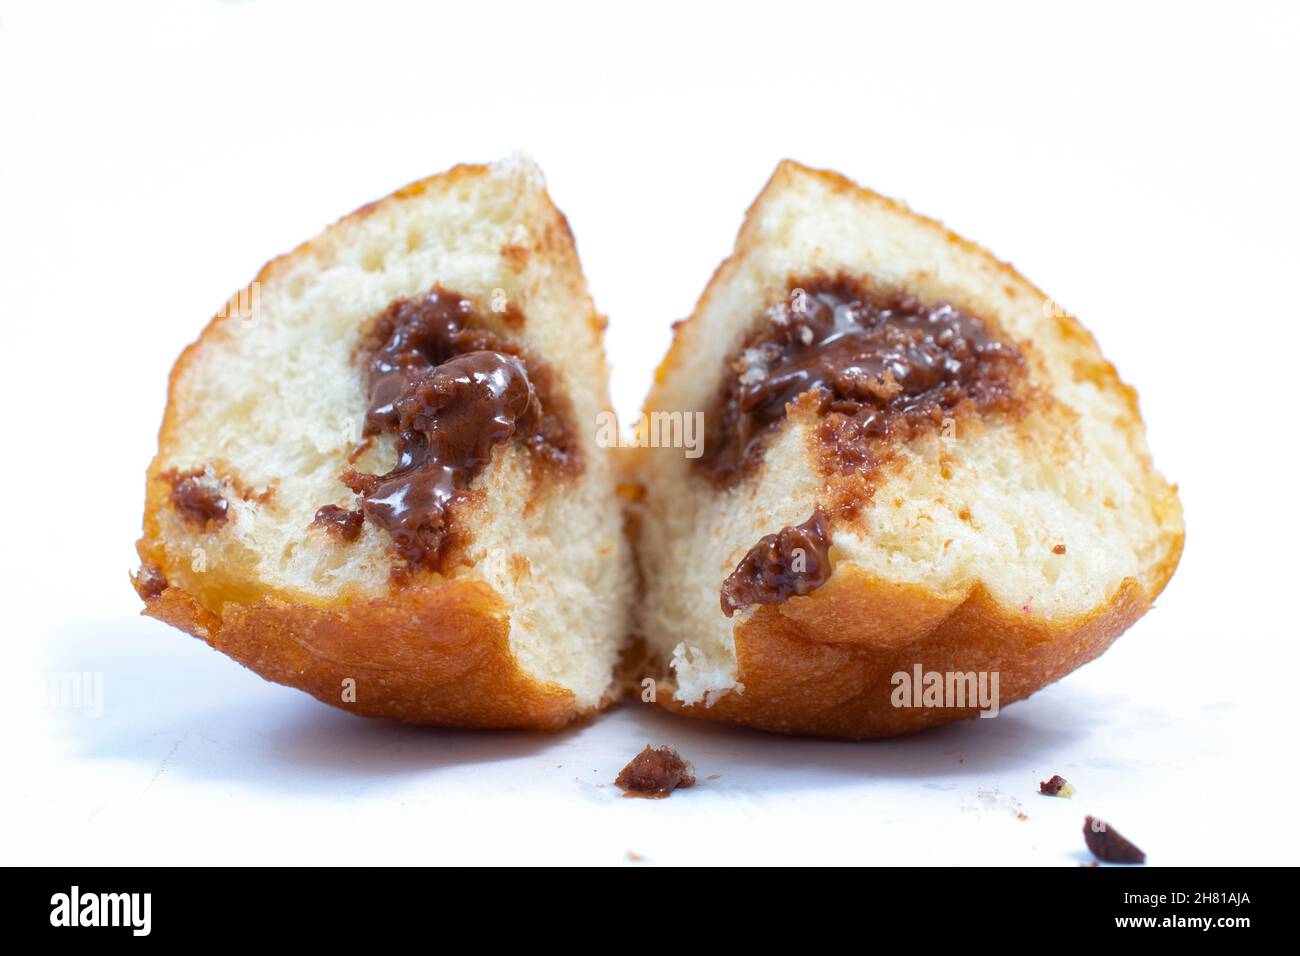 small round donuts with chocolate filling on white background. Stock Photo